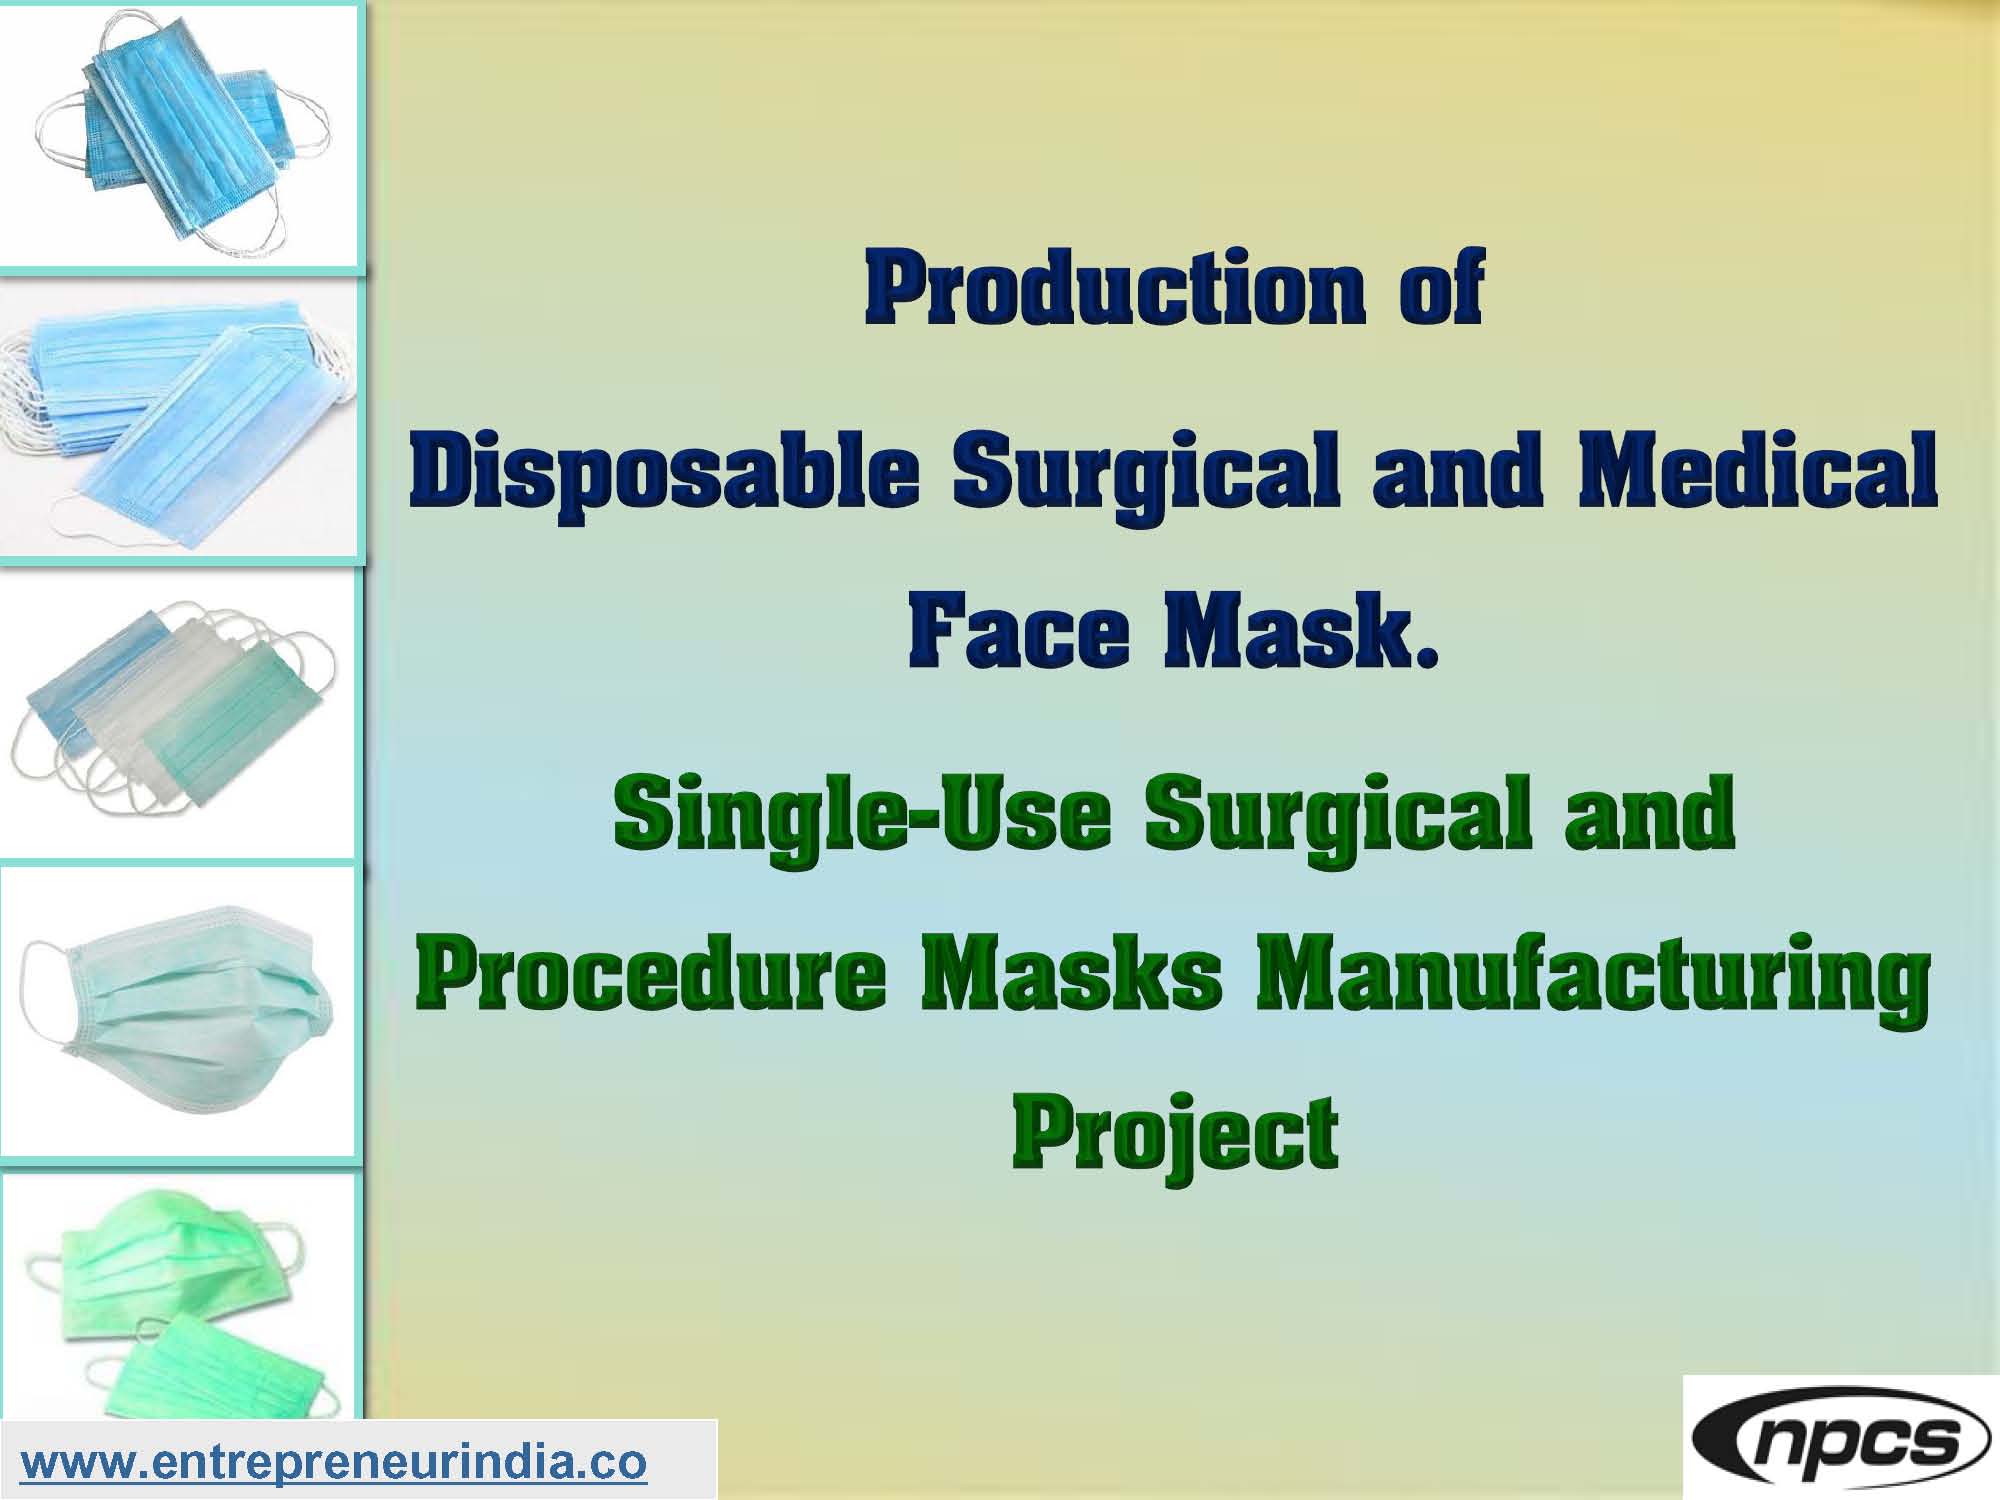 Production of Disposable Surgical and Medical Face Mask